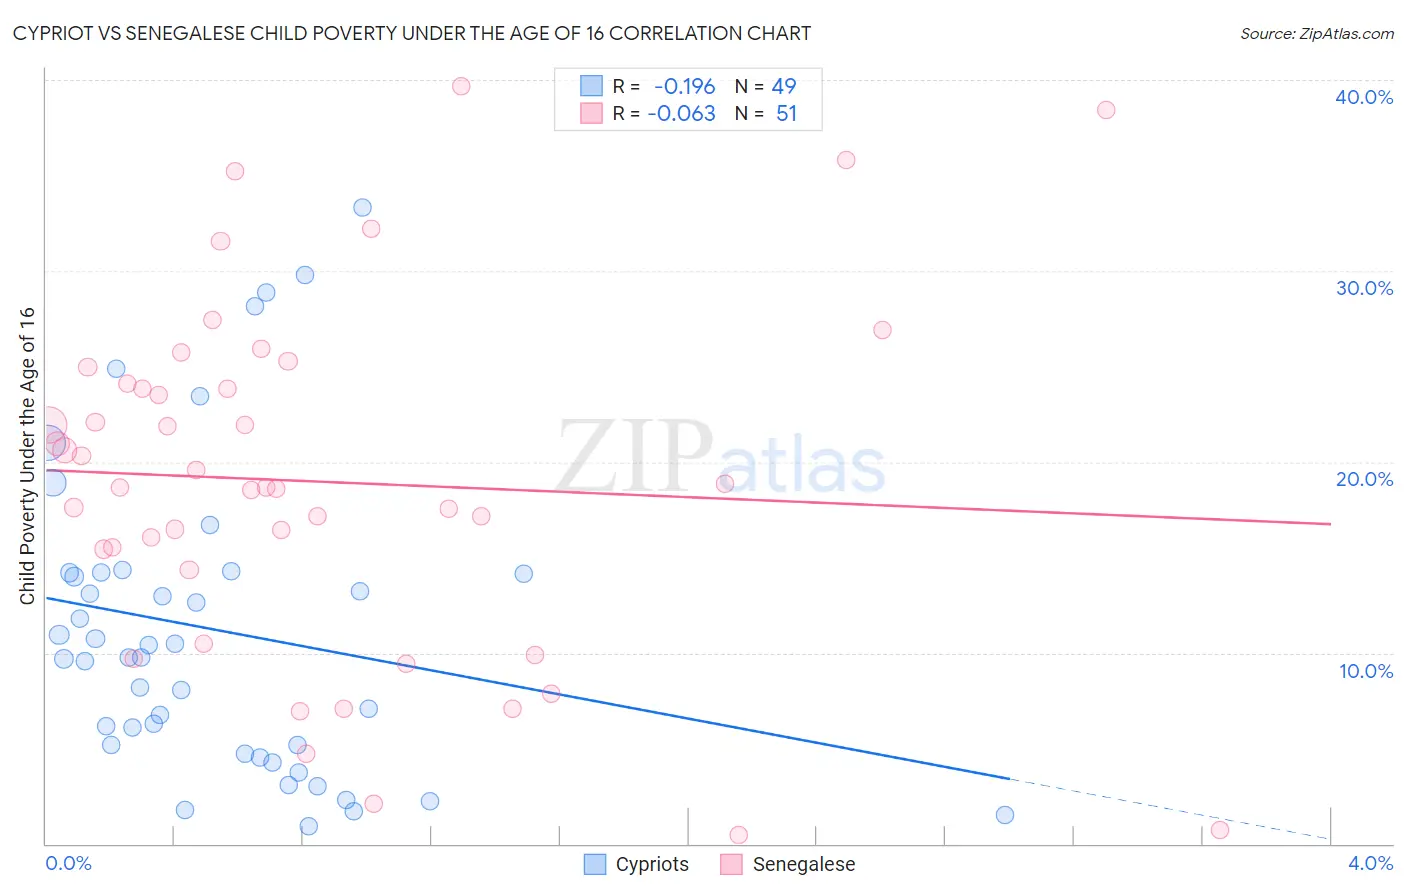 Cypriot vs Senegalese Child Poverty Under the Age of 16